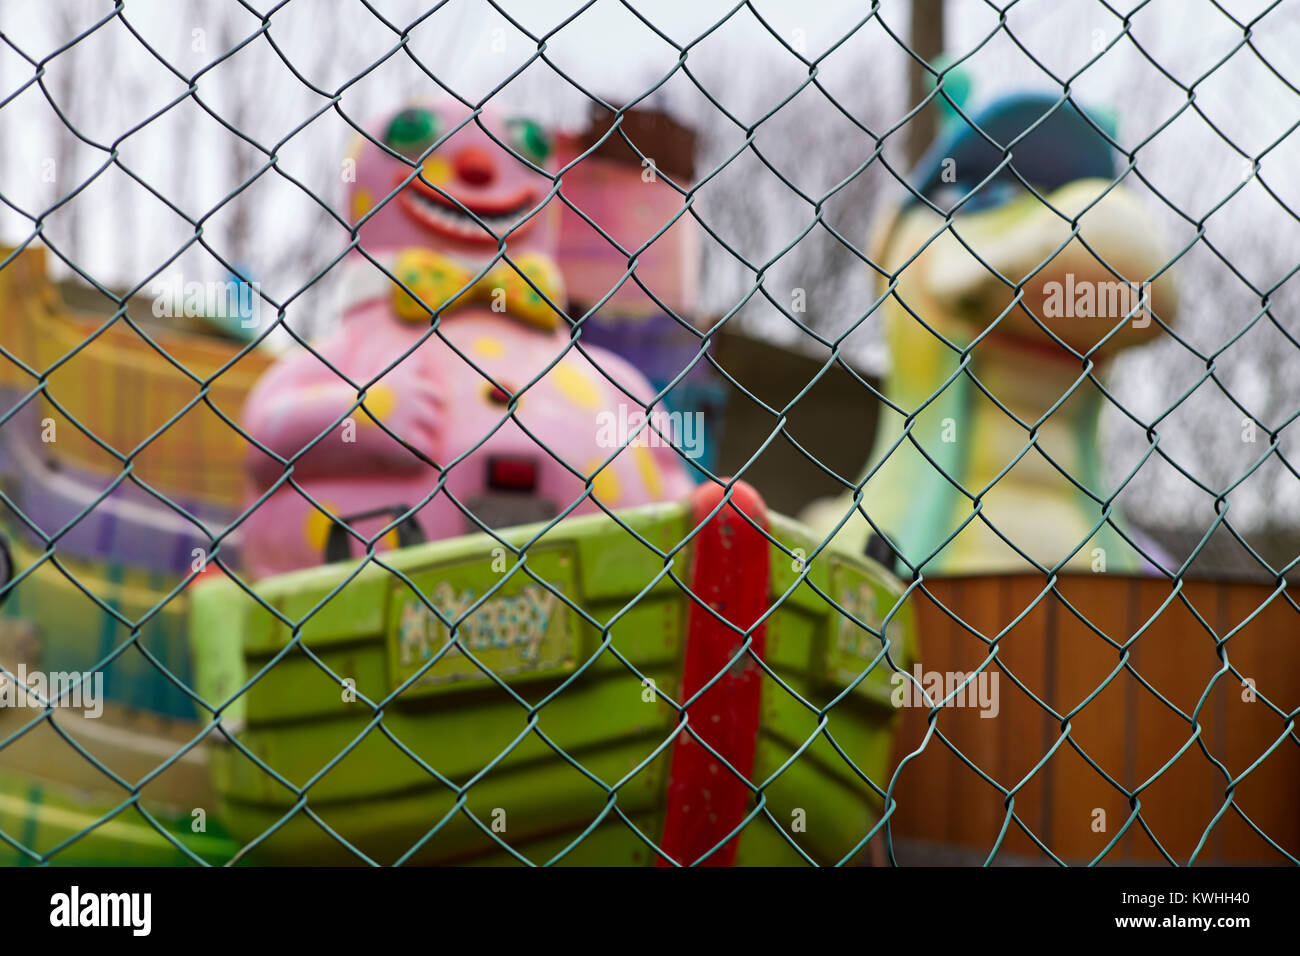 Mr Blobby amusement ride through a wire fence in a secondhand yard, Margate Stock Photo